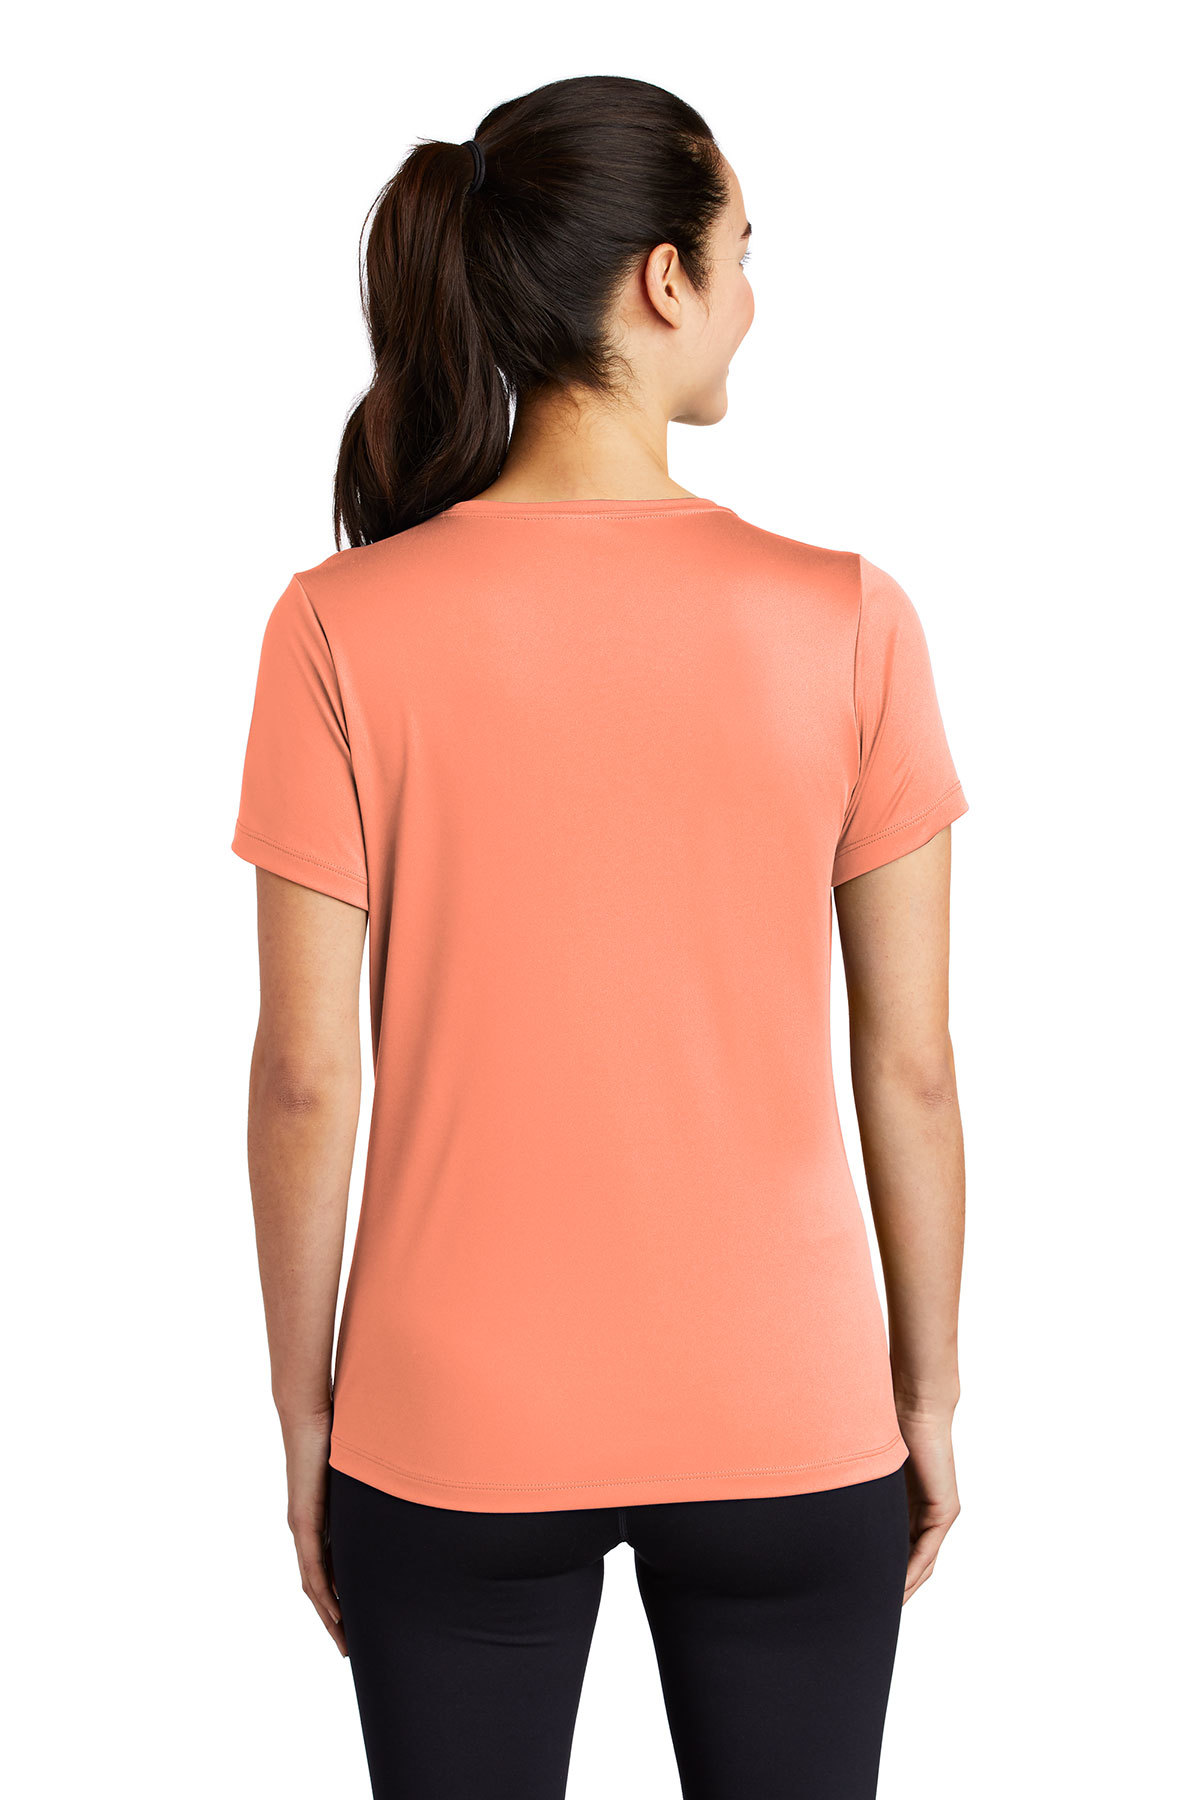 Women's GT Performance Shirt with Sun Hood M / Coral